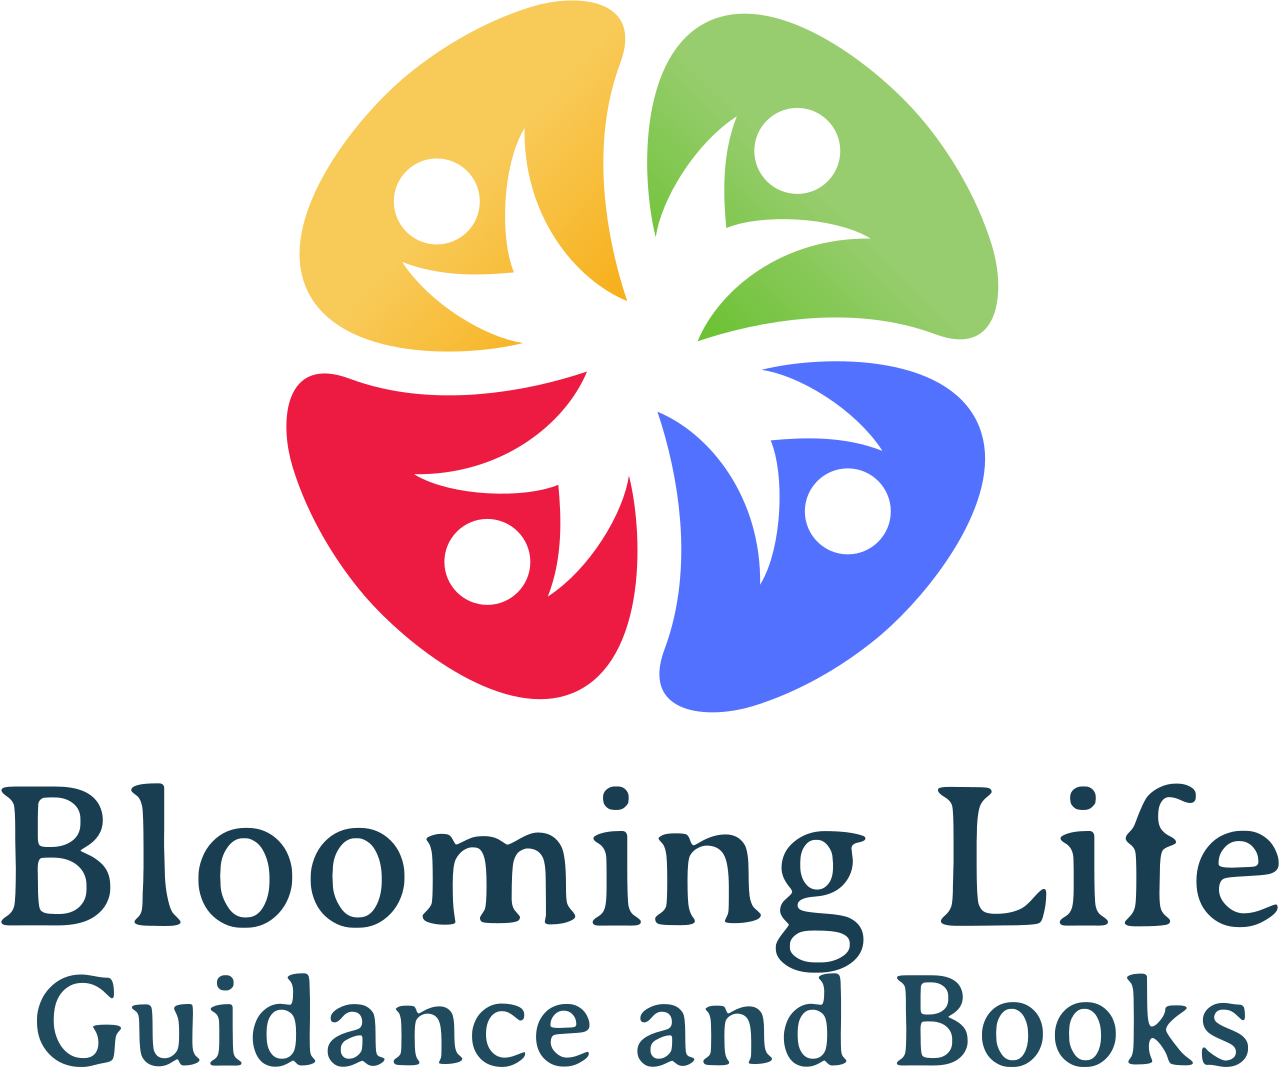 Blooming Life Guidance and Books